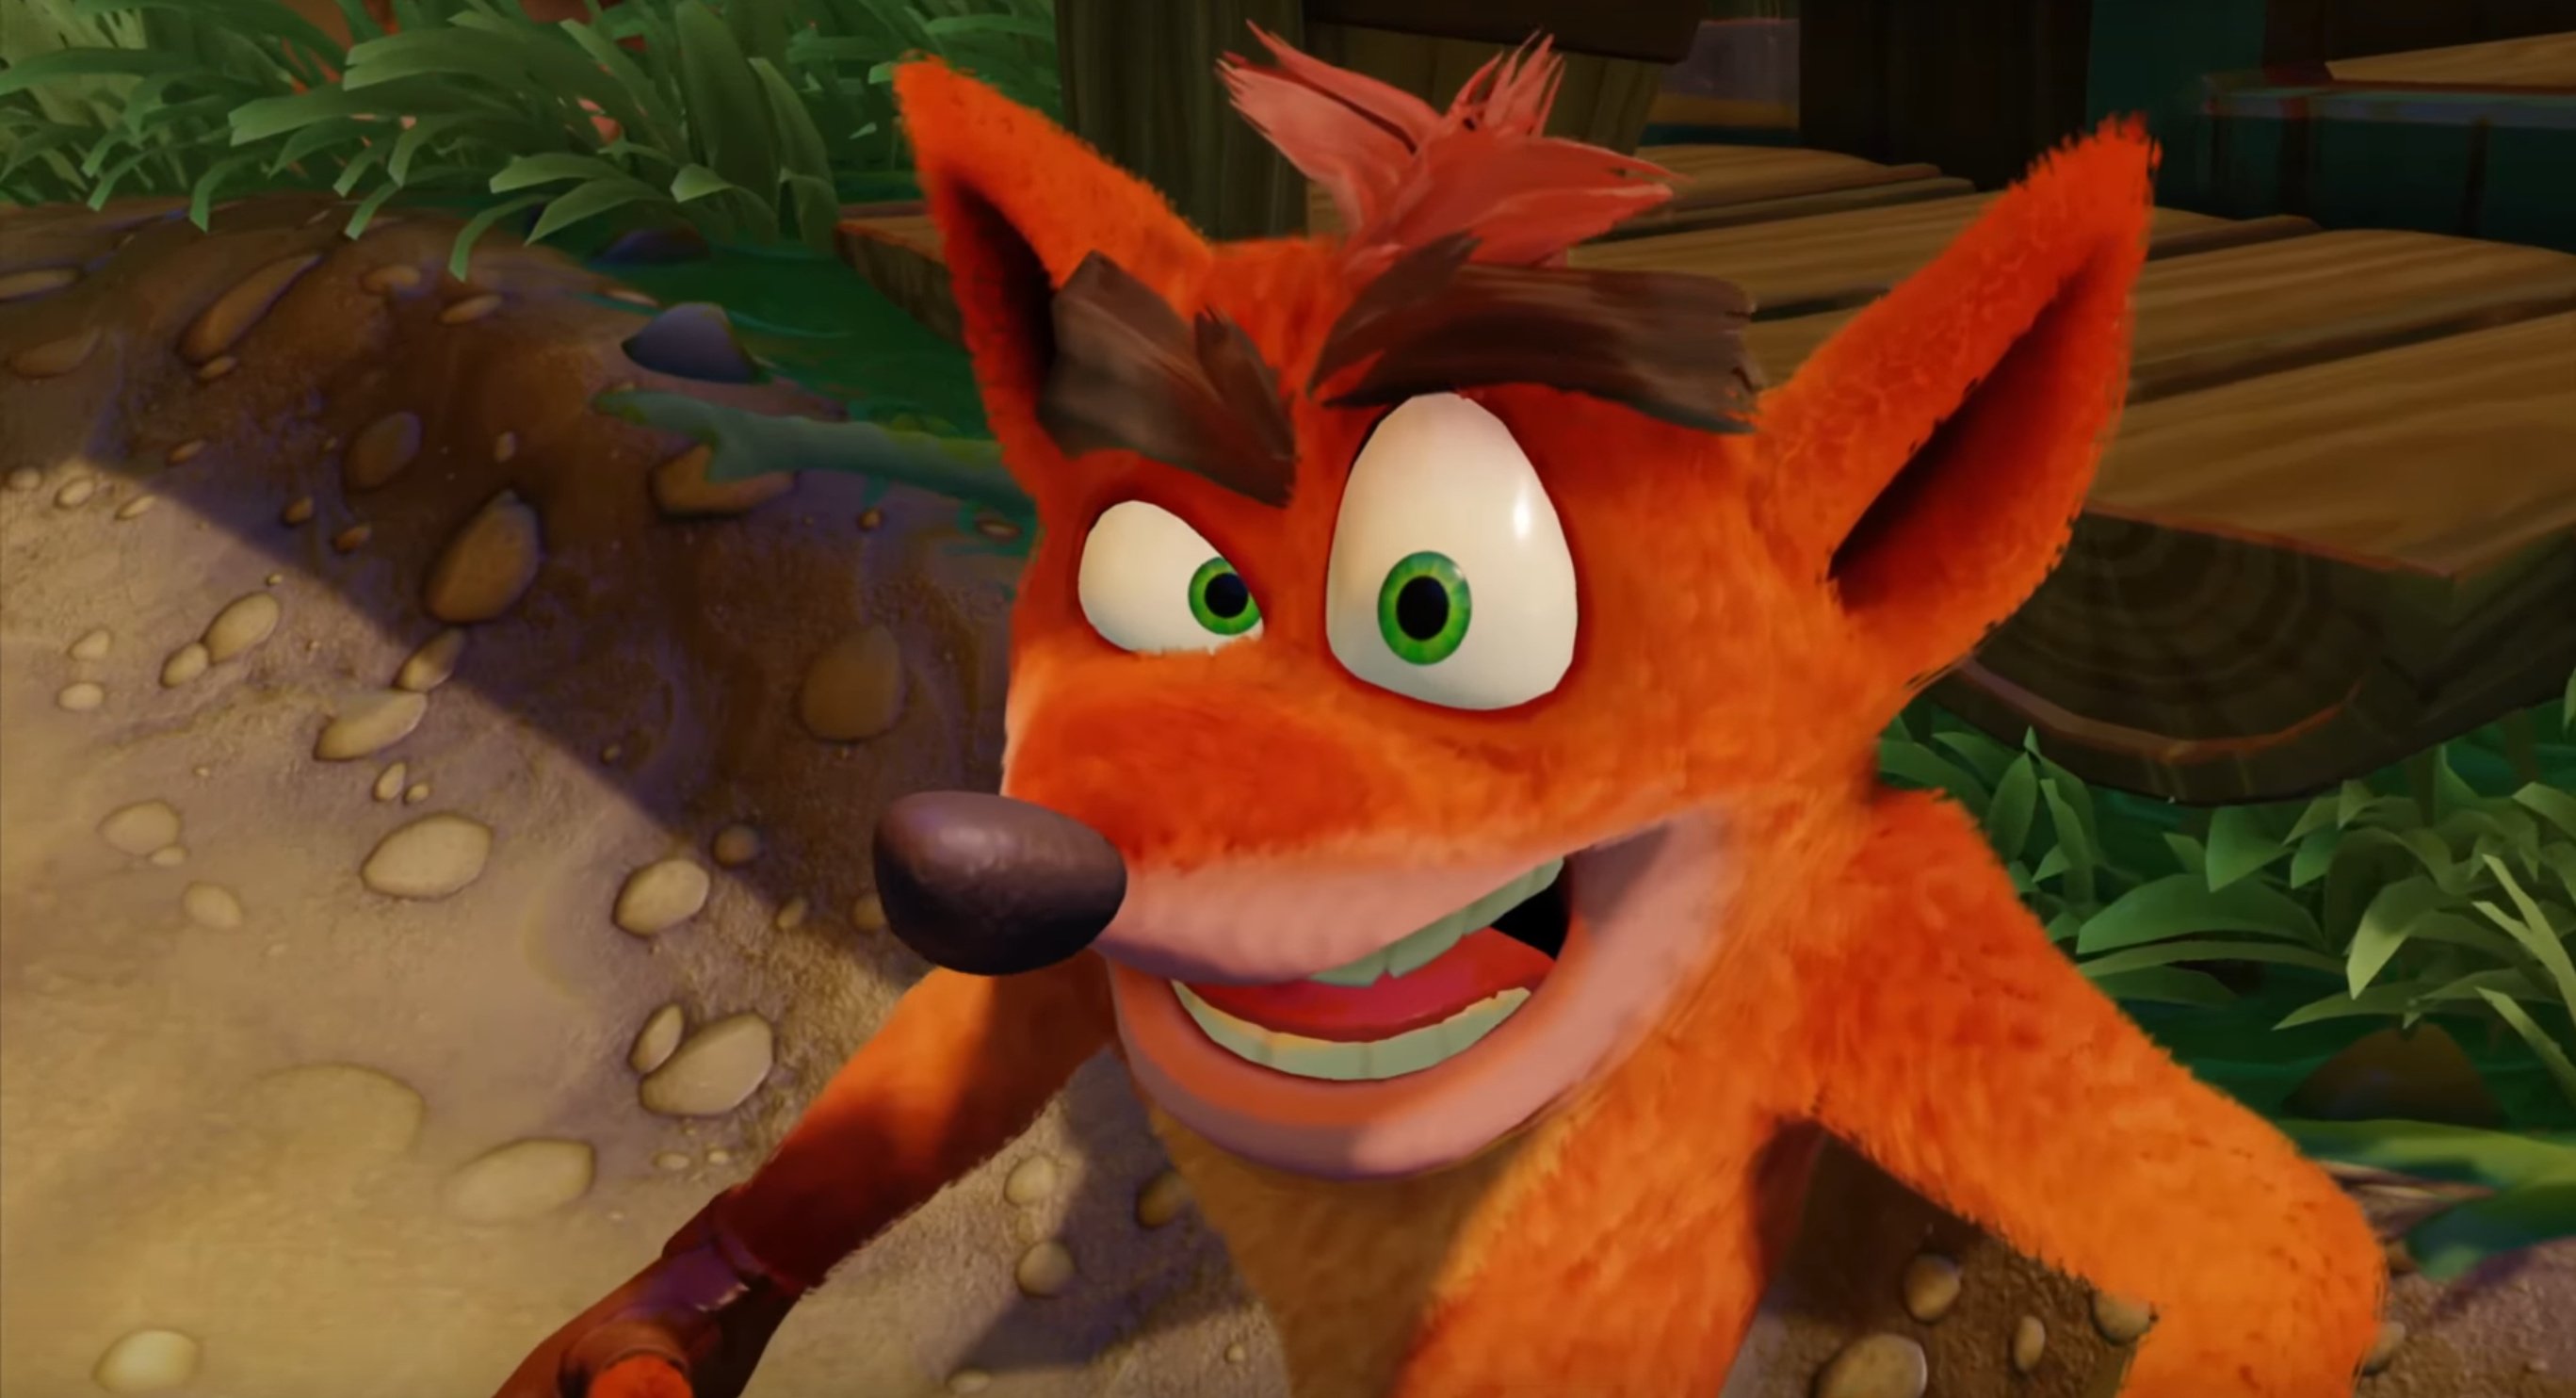 crash-bandicoot-ps4-release-date-teased-for-tomorrow-push-square